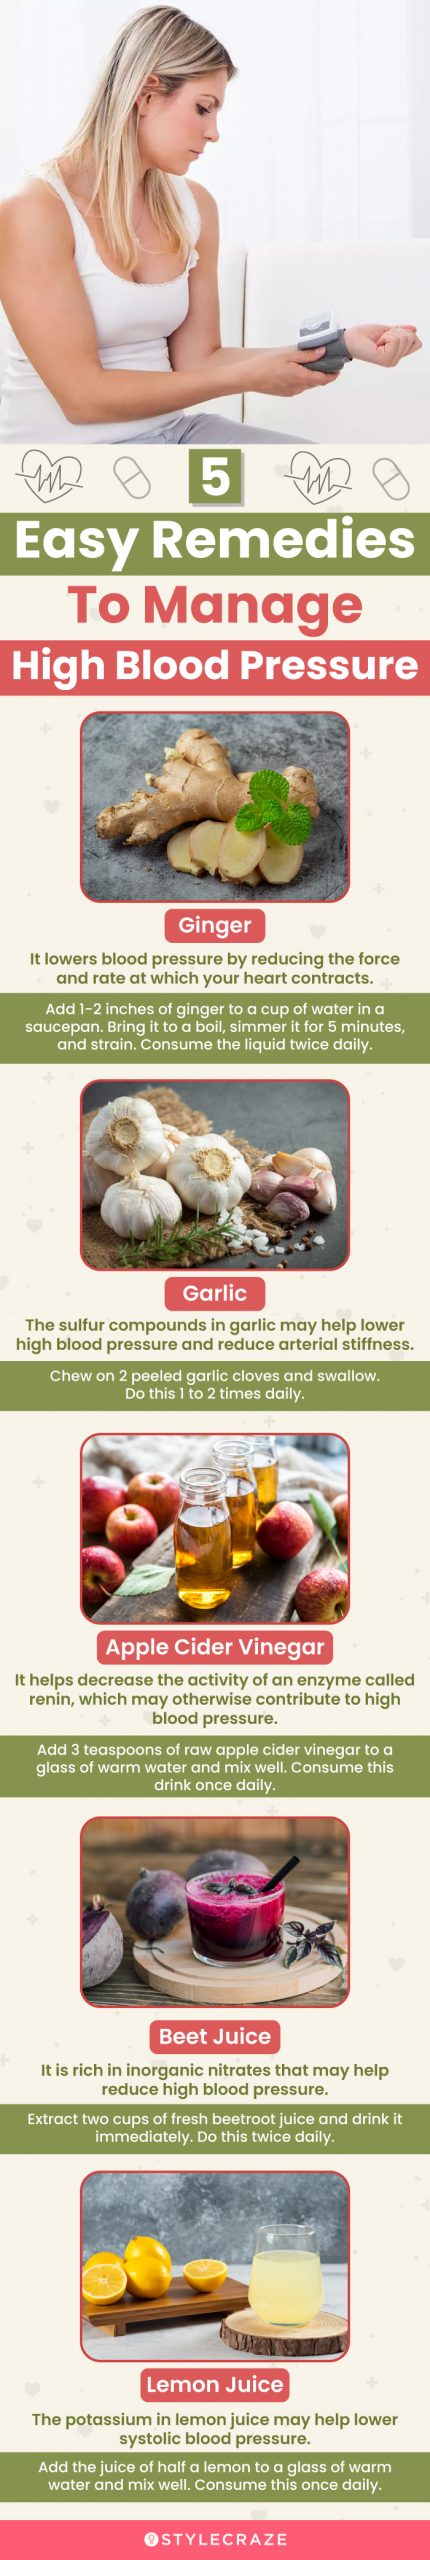 5 easy remedies to manage high blood pressure (infographic)